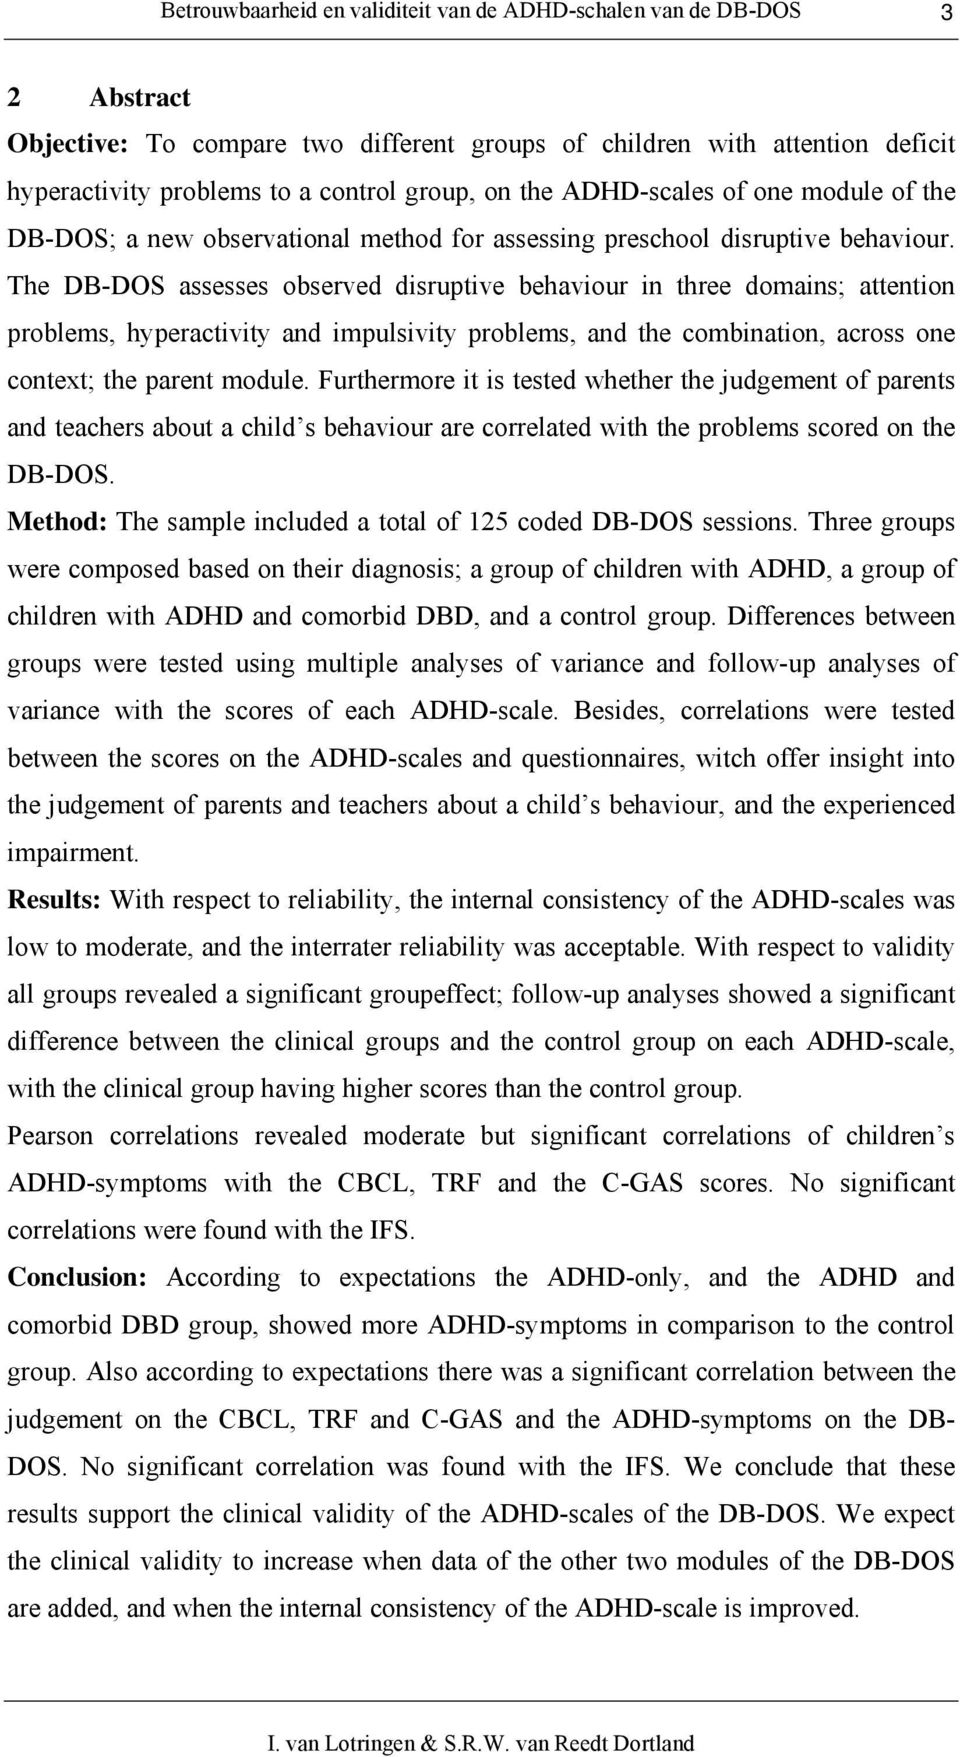 The DB-DOS assesses observed disruptive behaviour in three domains; attention problems, hyperactivity and impulsivity problems, and the combination, across one context; the parent module.